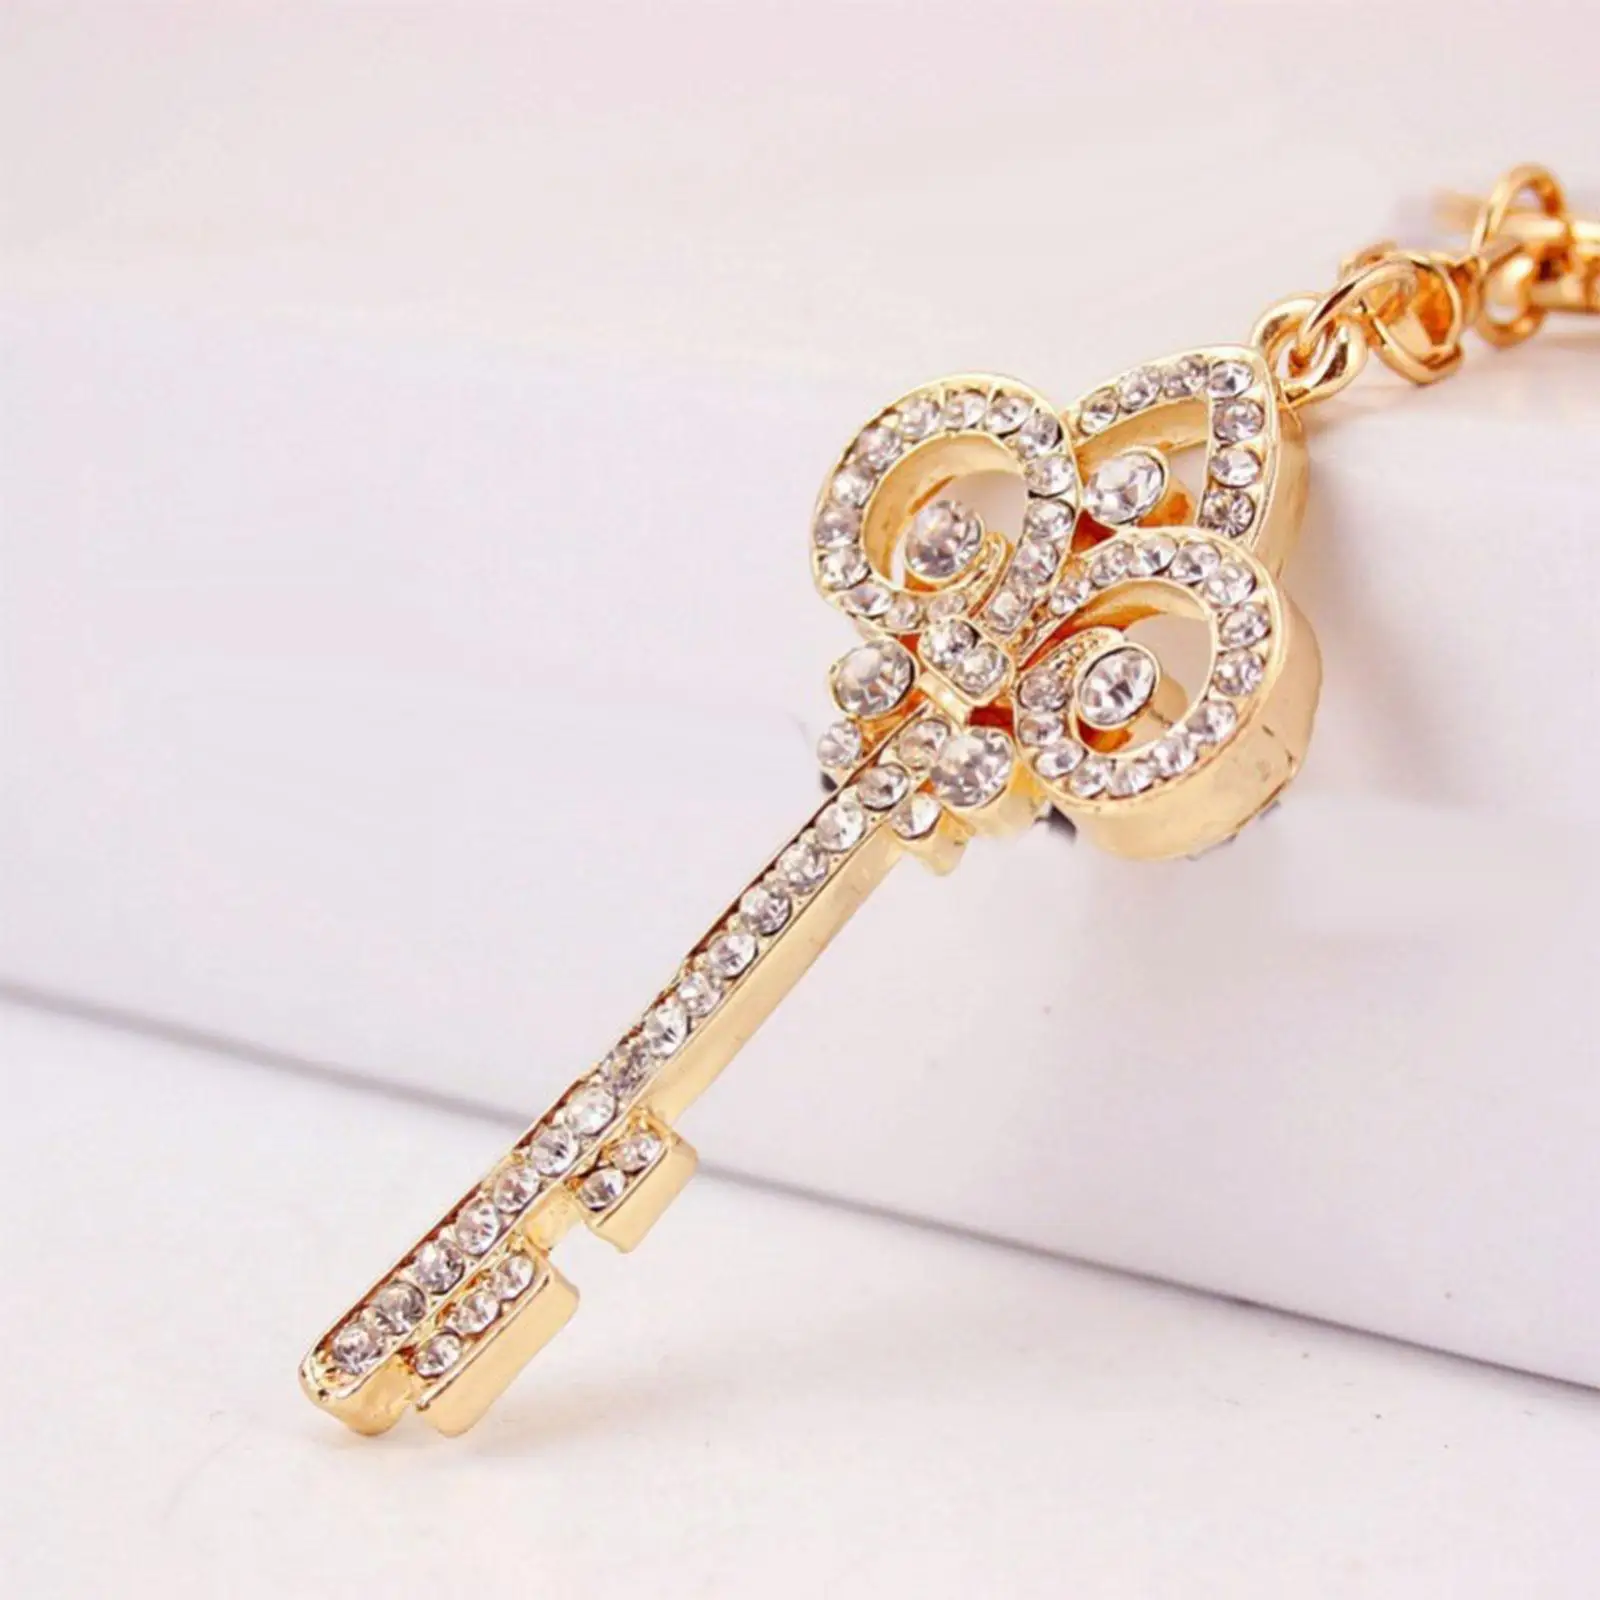 Key Rhinestone Keychain Gifts Accessories Decorative Creative Sparkling Glitter Keyring Bag Charm for Wallet Tote Backpack Girls